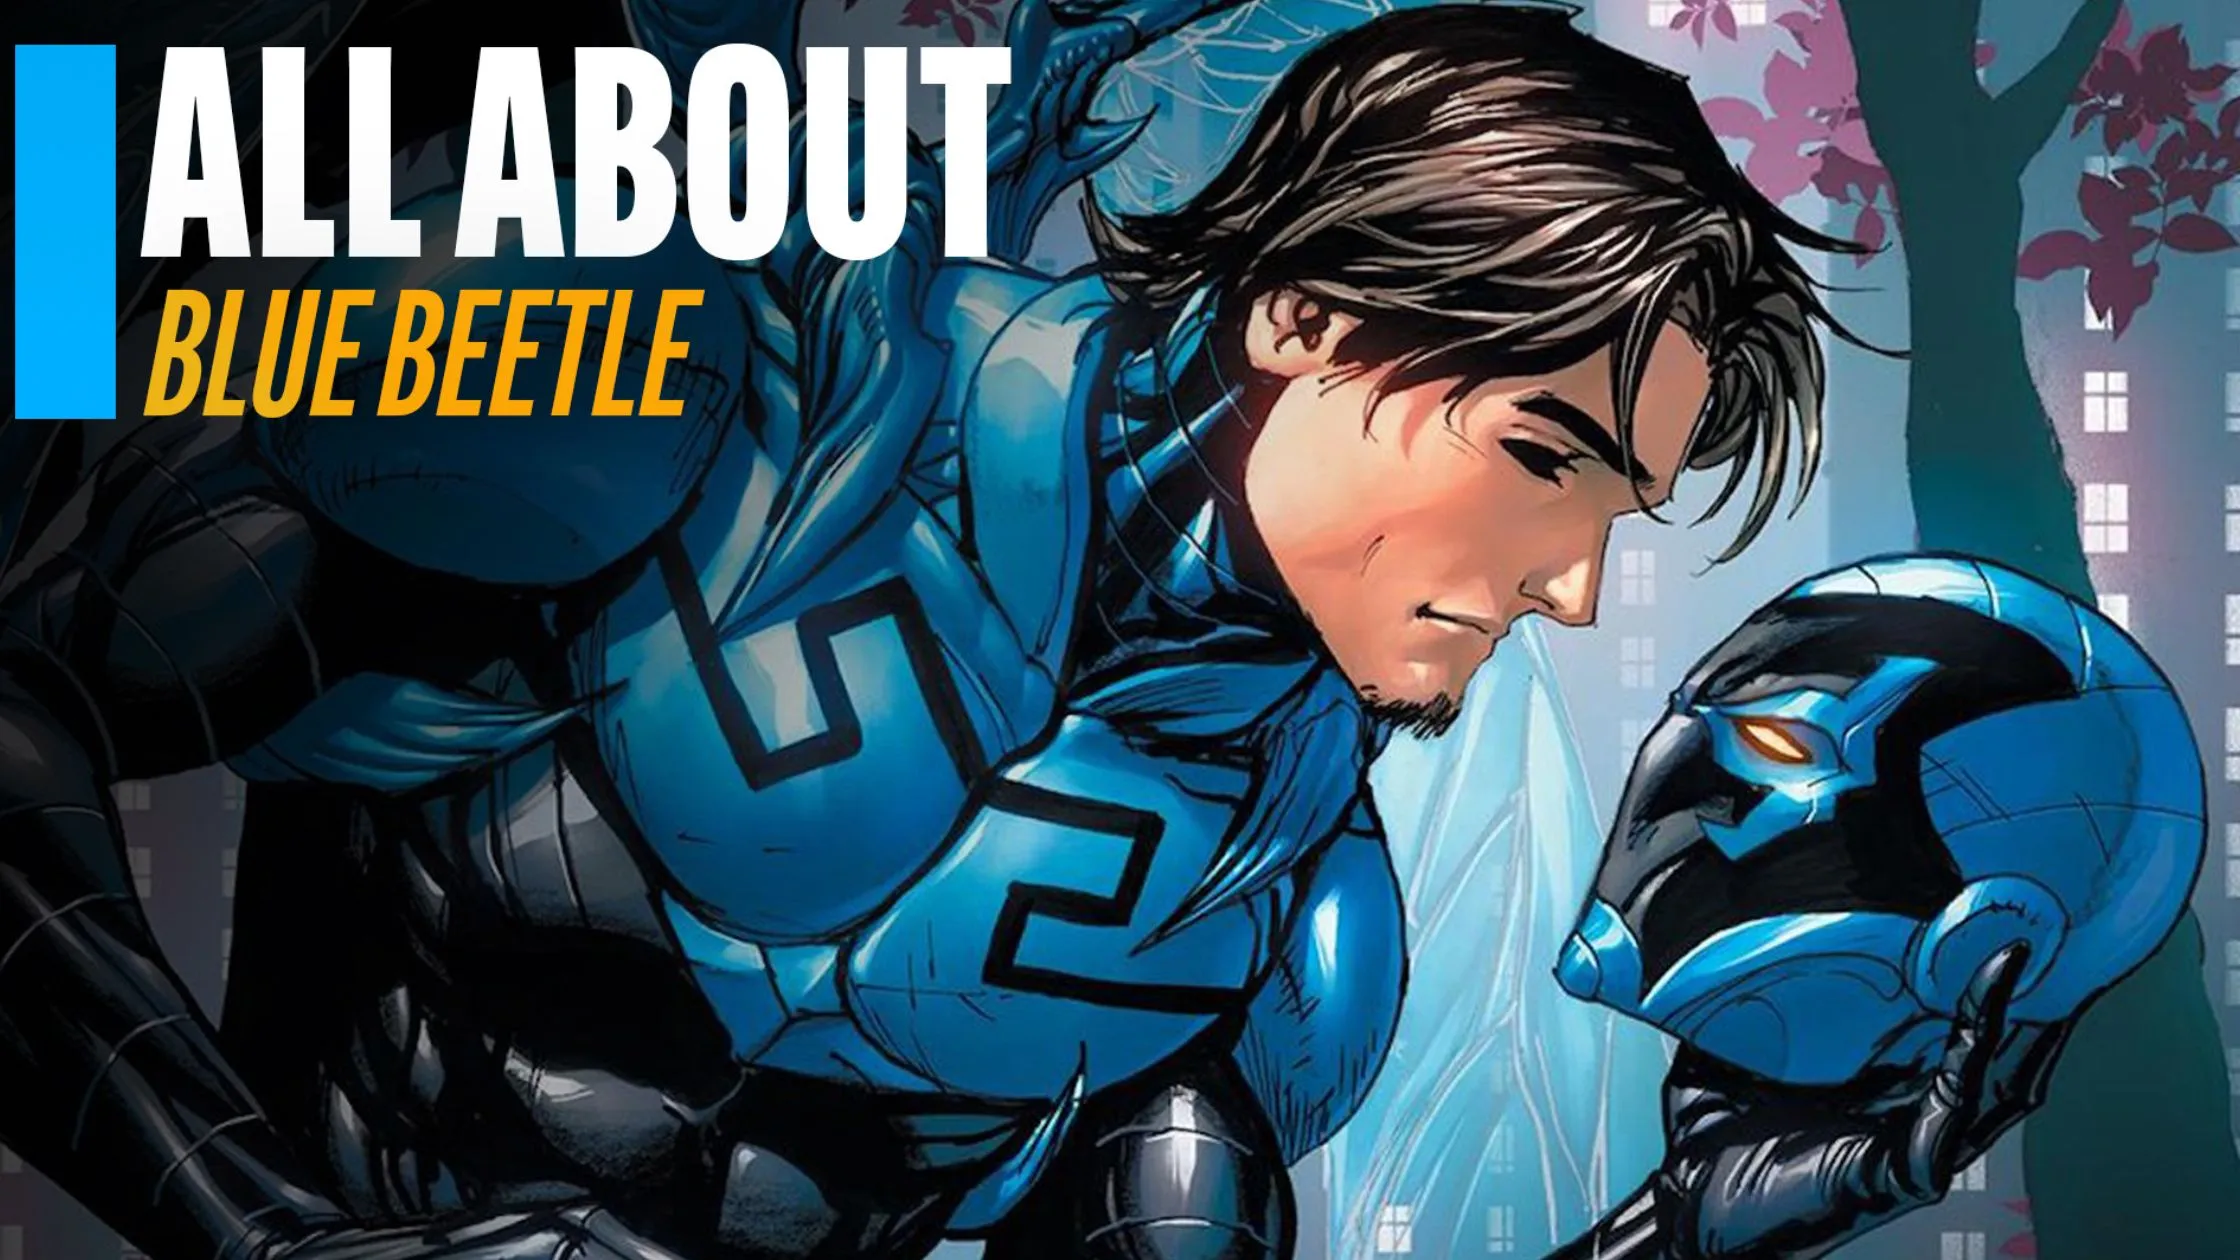 "Blue Beetle Movie: What's the Buzz? Plot, Cast, and Release Date Breakdown!"